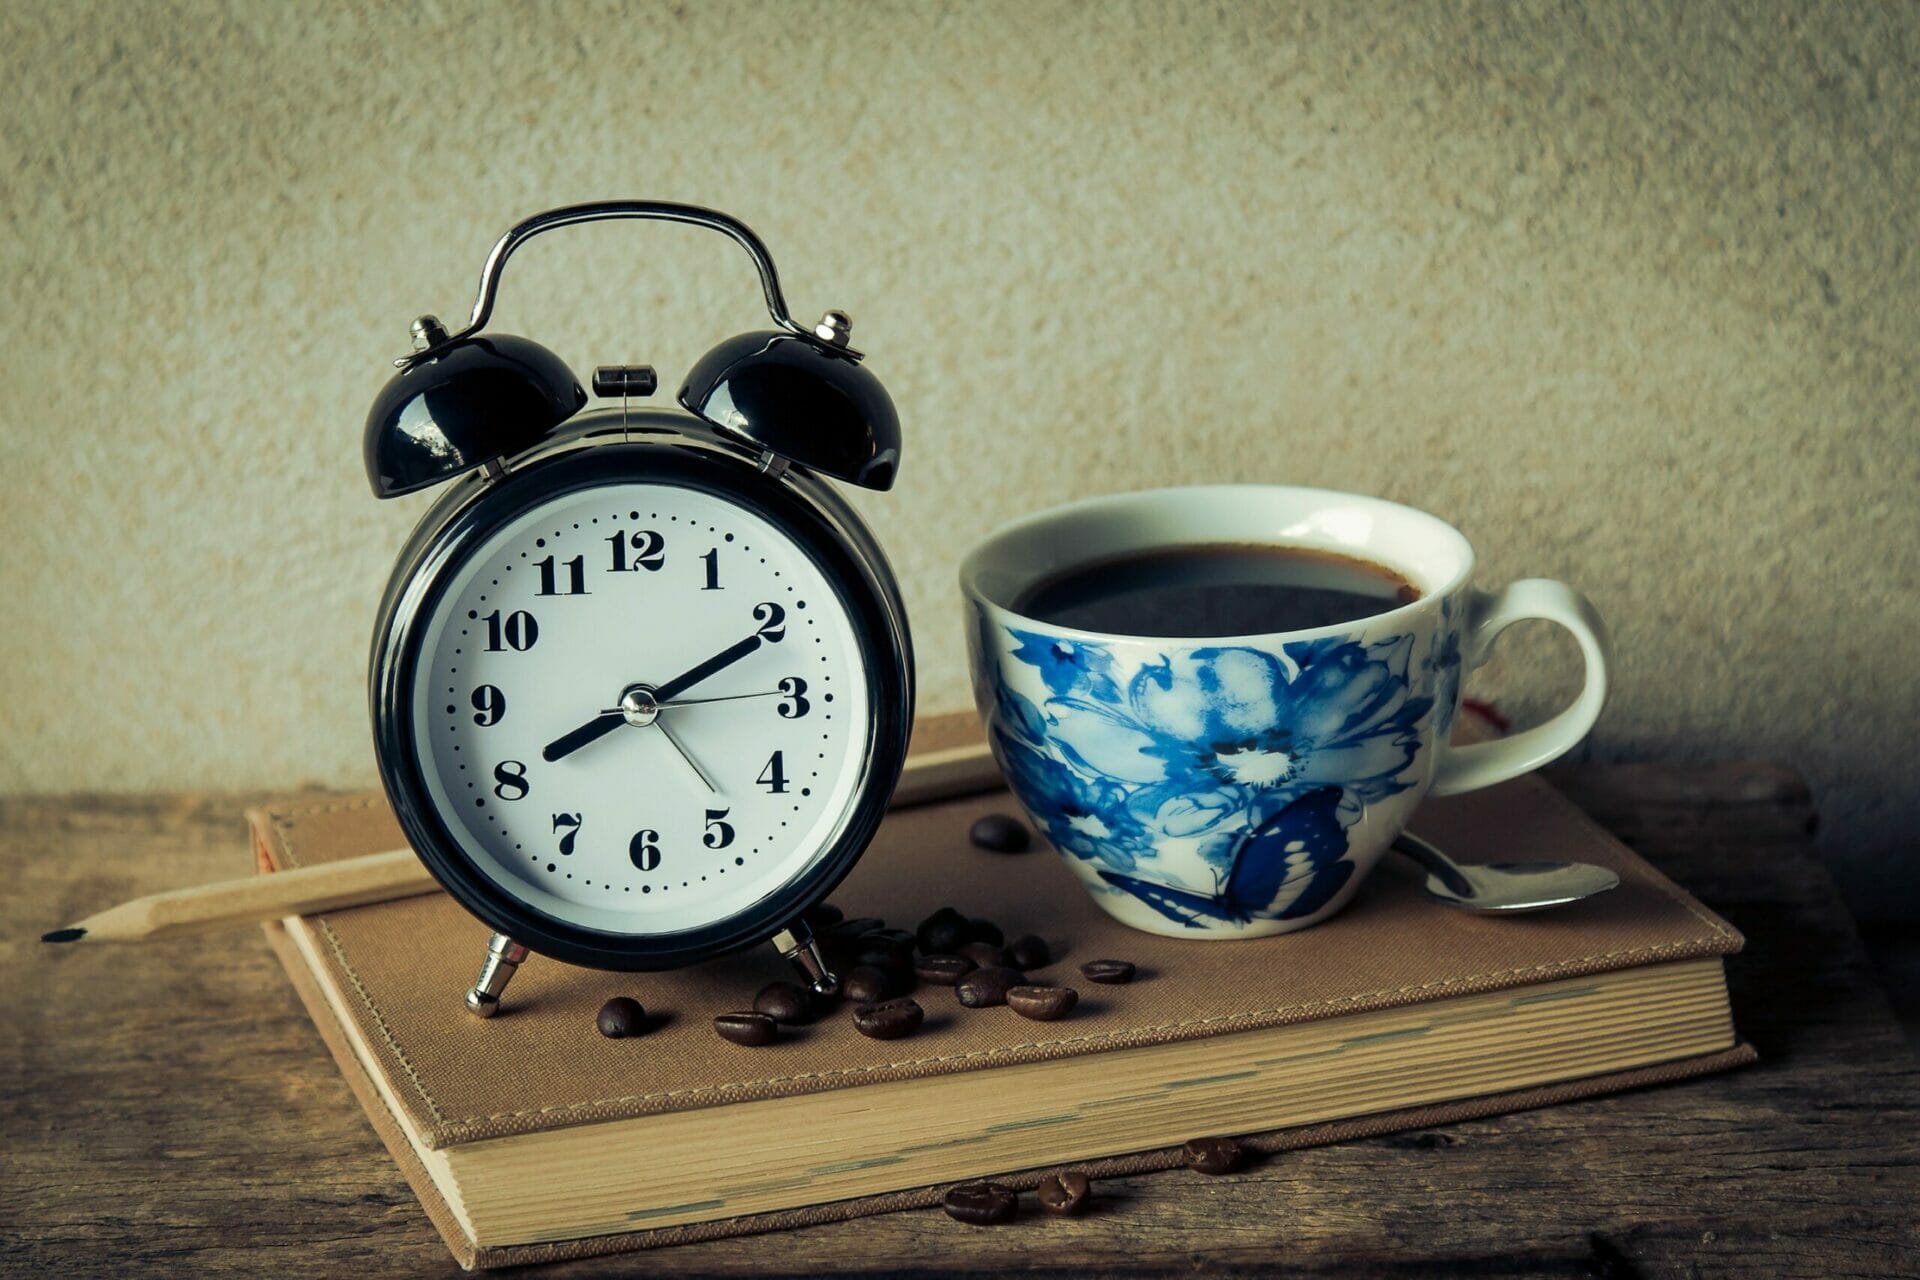 Clock with a cup of coffee next to it - The World is Waking Up